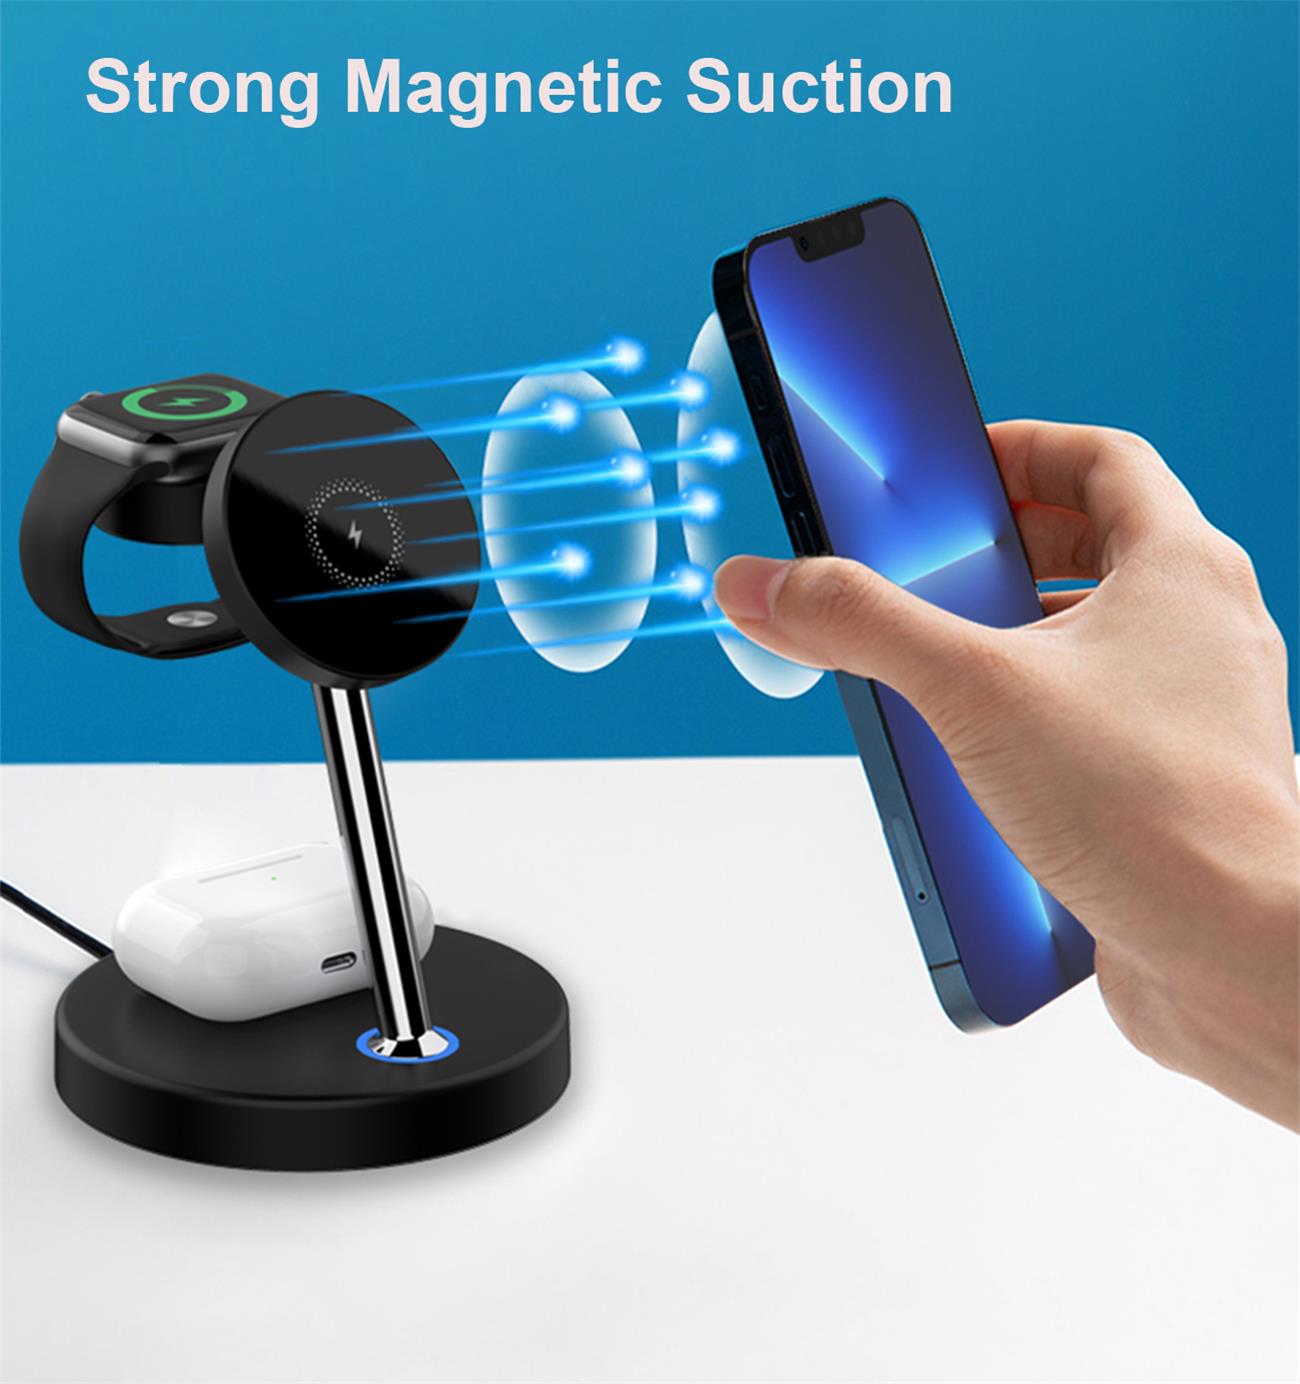 Magnetic Wireless Charger 3 In 1 Multifunction 15w Fast Charge For Iphone, Iwatch, Airpod